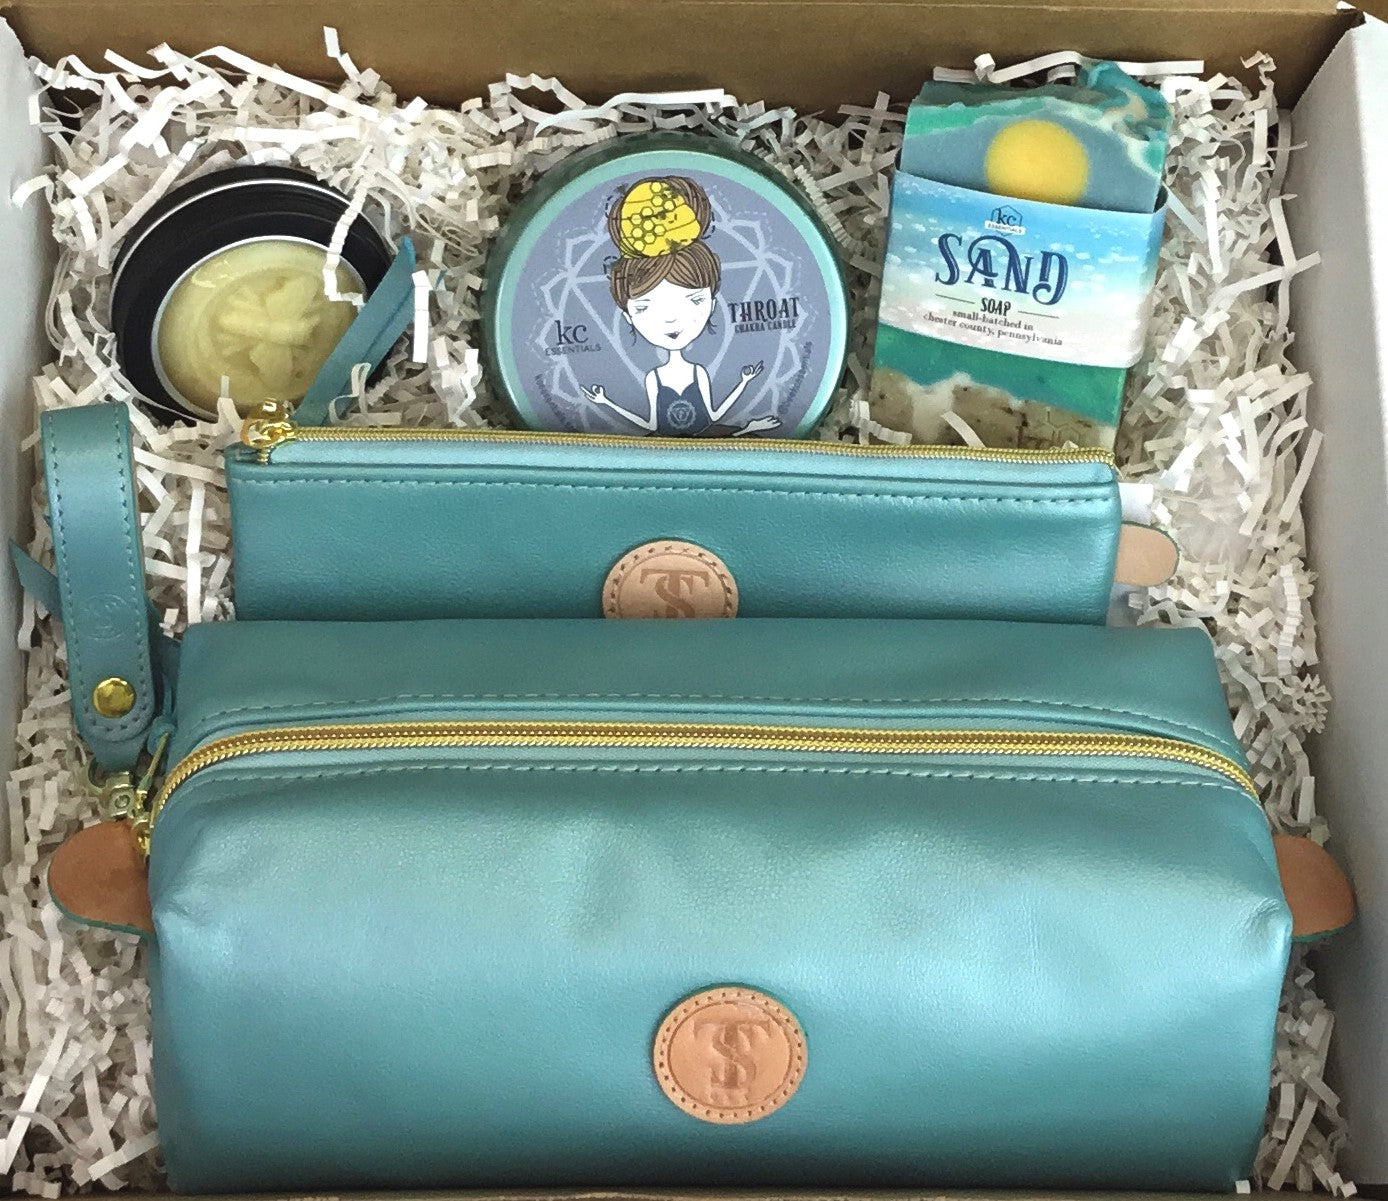 Town &amp; Shore Handcrafted Serenity Gift set featuring T5 Leather bath kit and brush bag shown in turqouise calfskin leather. KC Essentials artisan made vegan bar soap, scented soy chakra candle in a turqoise colored metal tin with a lady in a seated yoga pose on lid, and natural solid lotion bar in metal tin. Arranged in gift box with sustainable eco-friendly white crinkle paper.